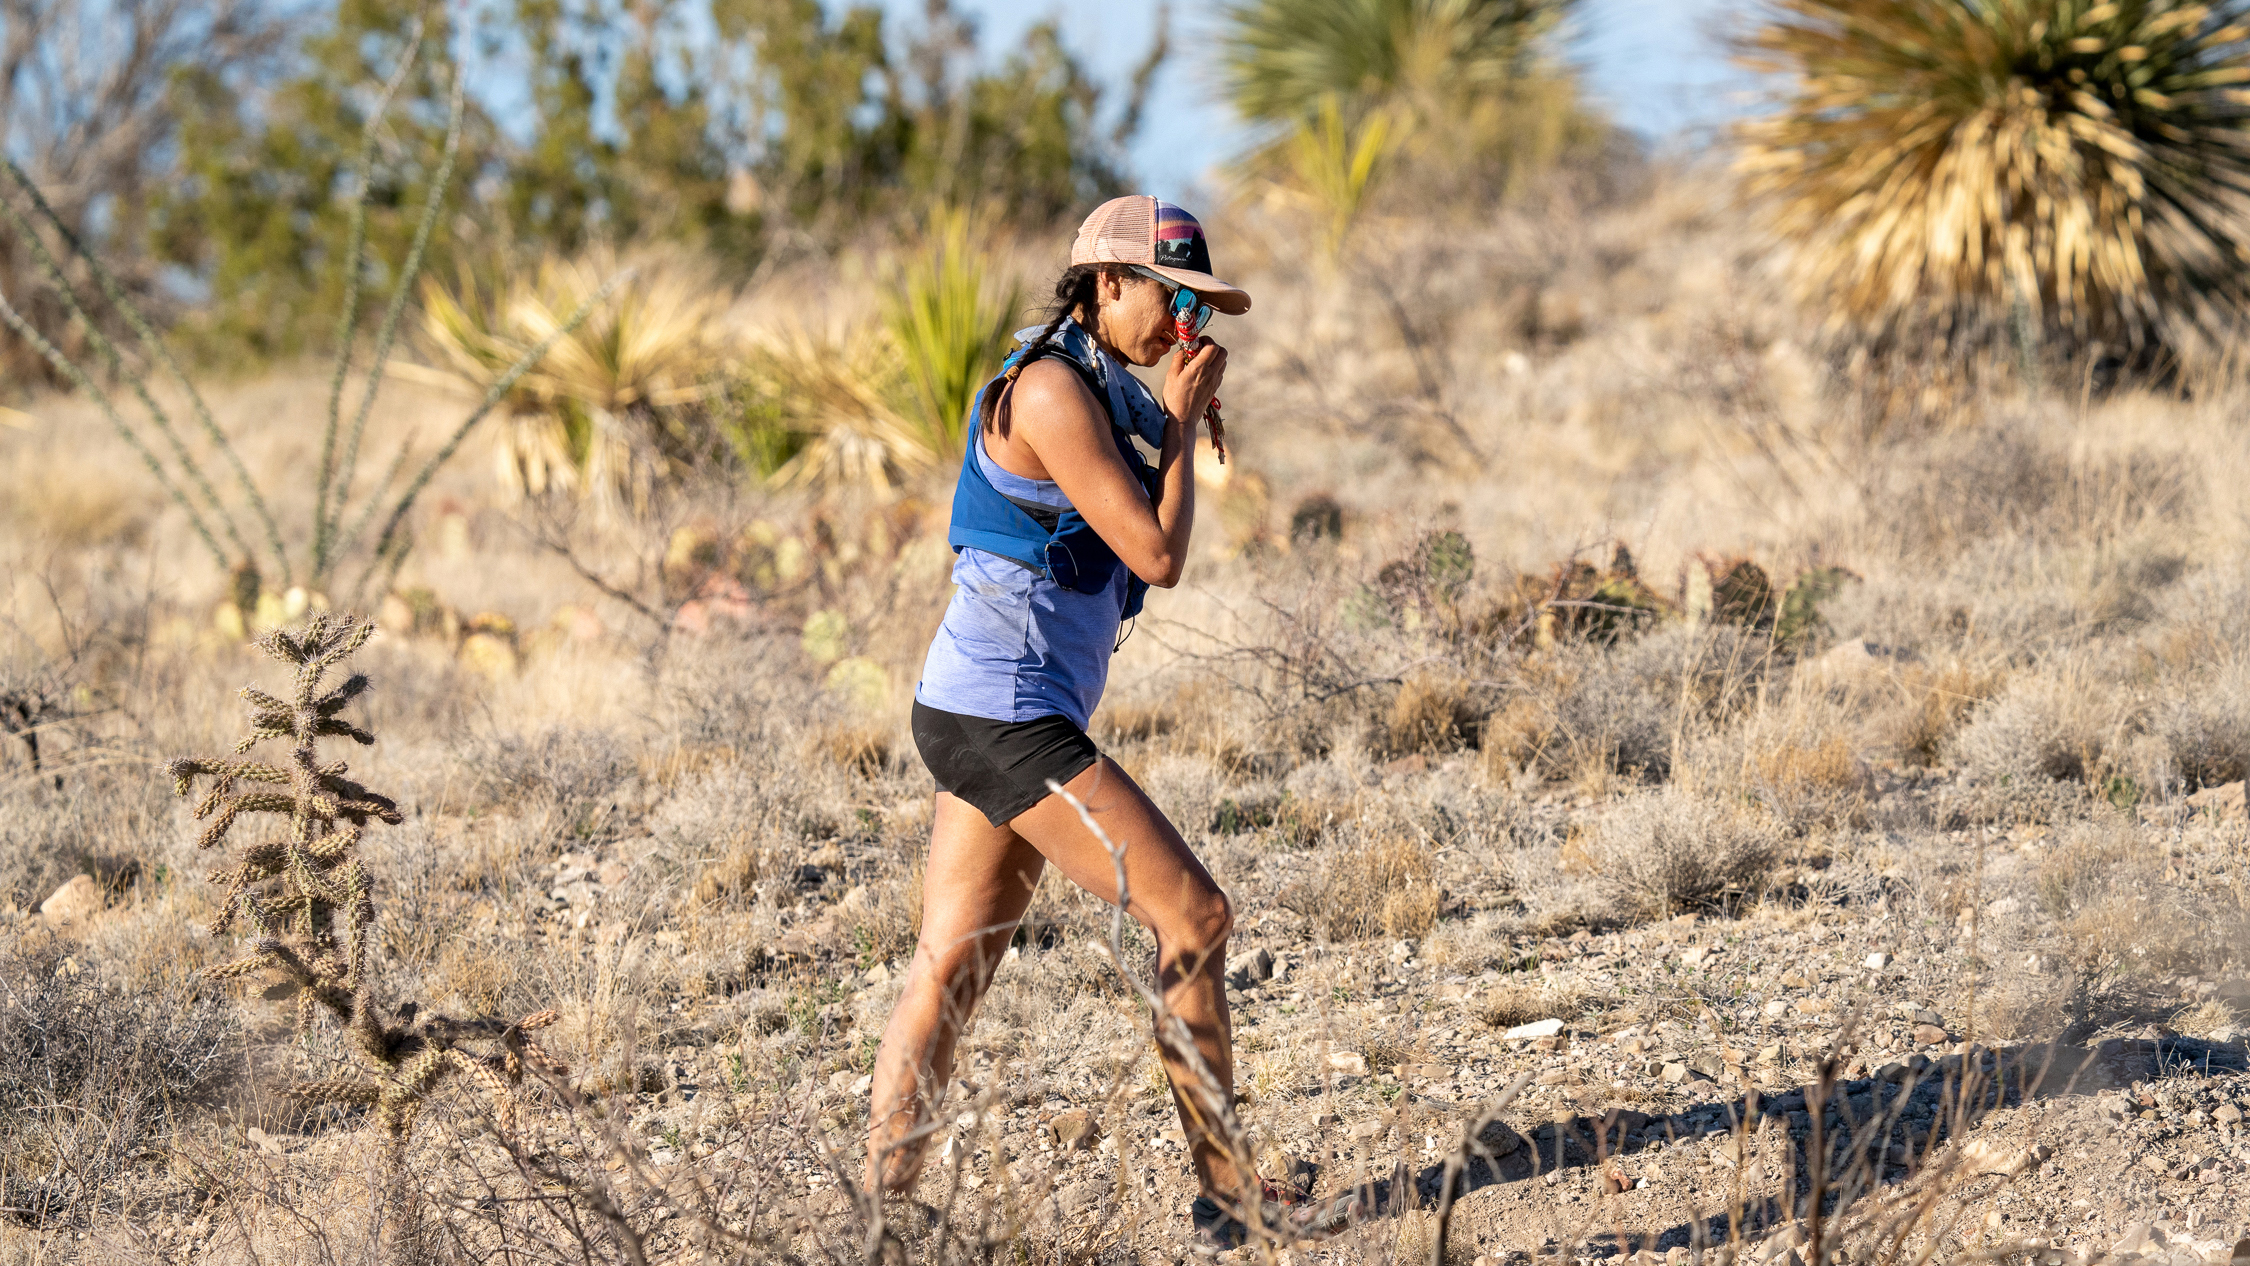 A still of Lydia Jennings, Pascua Yaqui (Yoeme) and Huichol (Wixaritari), celebrating her 2020 graduation from the University of Arizona during her 50-mile-run dedicated to Indigenous scientists. Her run is documented in Patagonia's Run To Be Visible episode. 